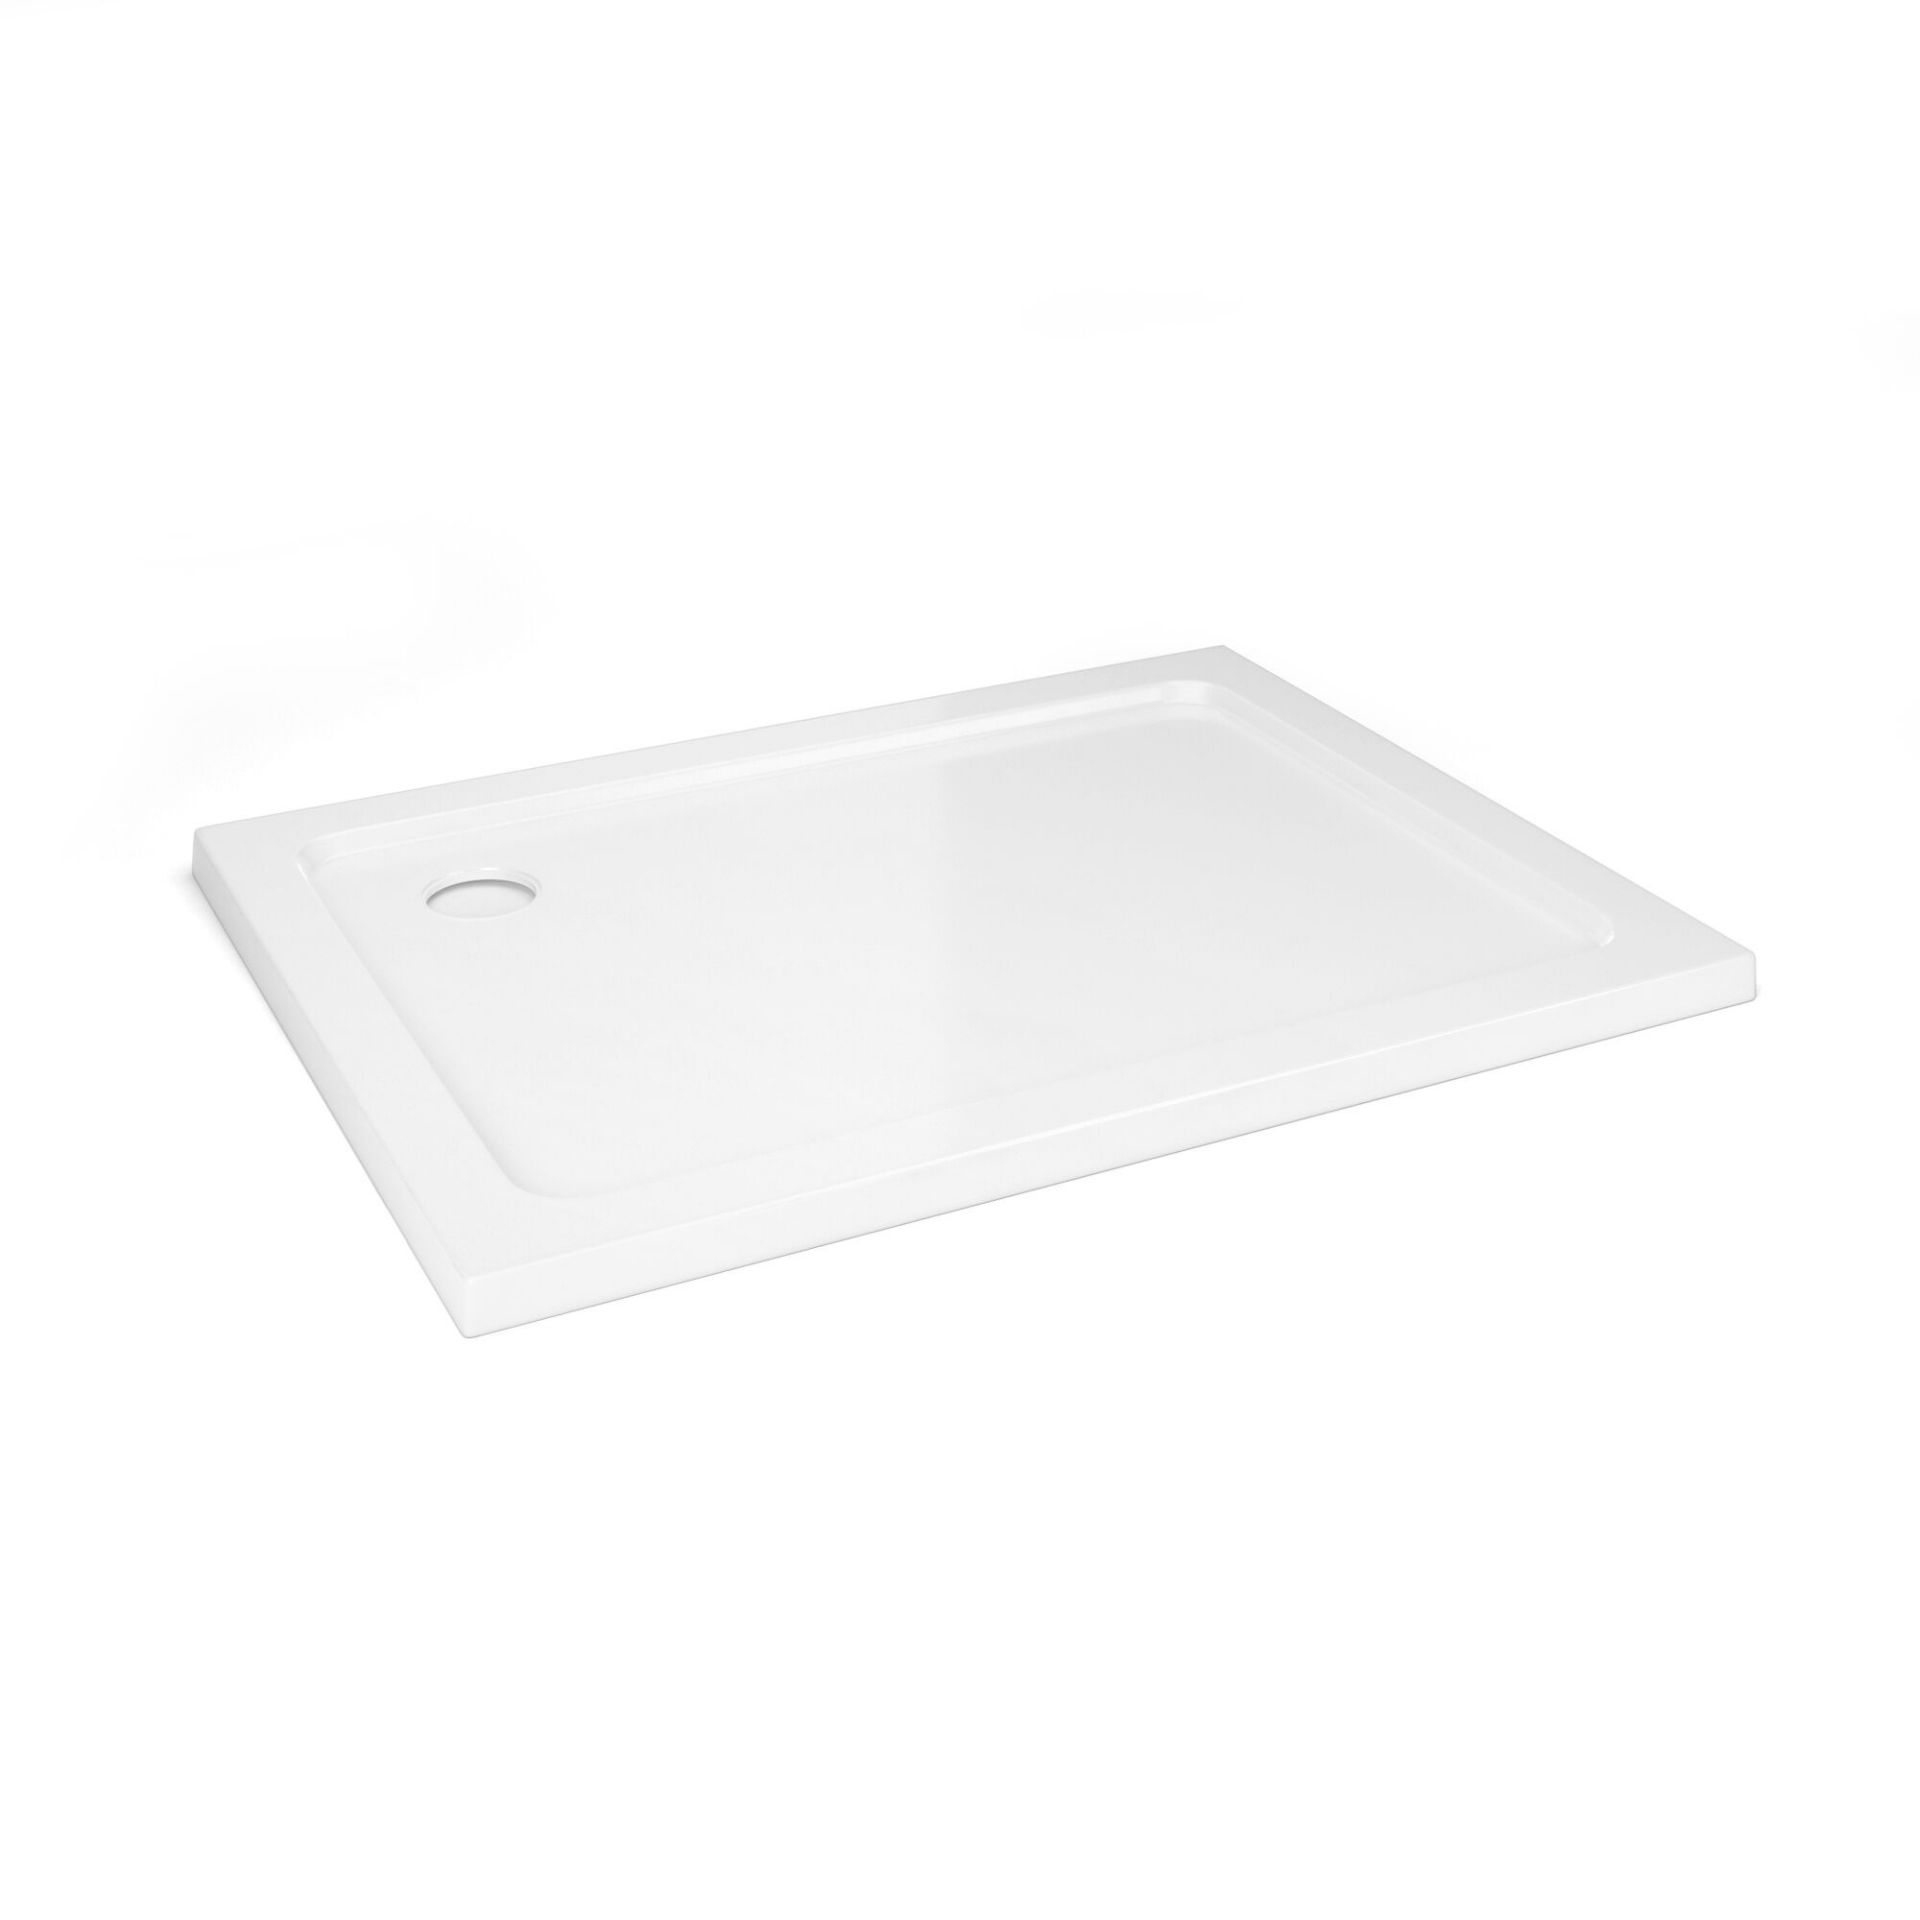 (RR79) 1000x760mm Rectangular Stone Shower Tray - Ultra Slim. RRP £299.99. Low profile ultra ...(( - Image 2 of 2